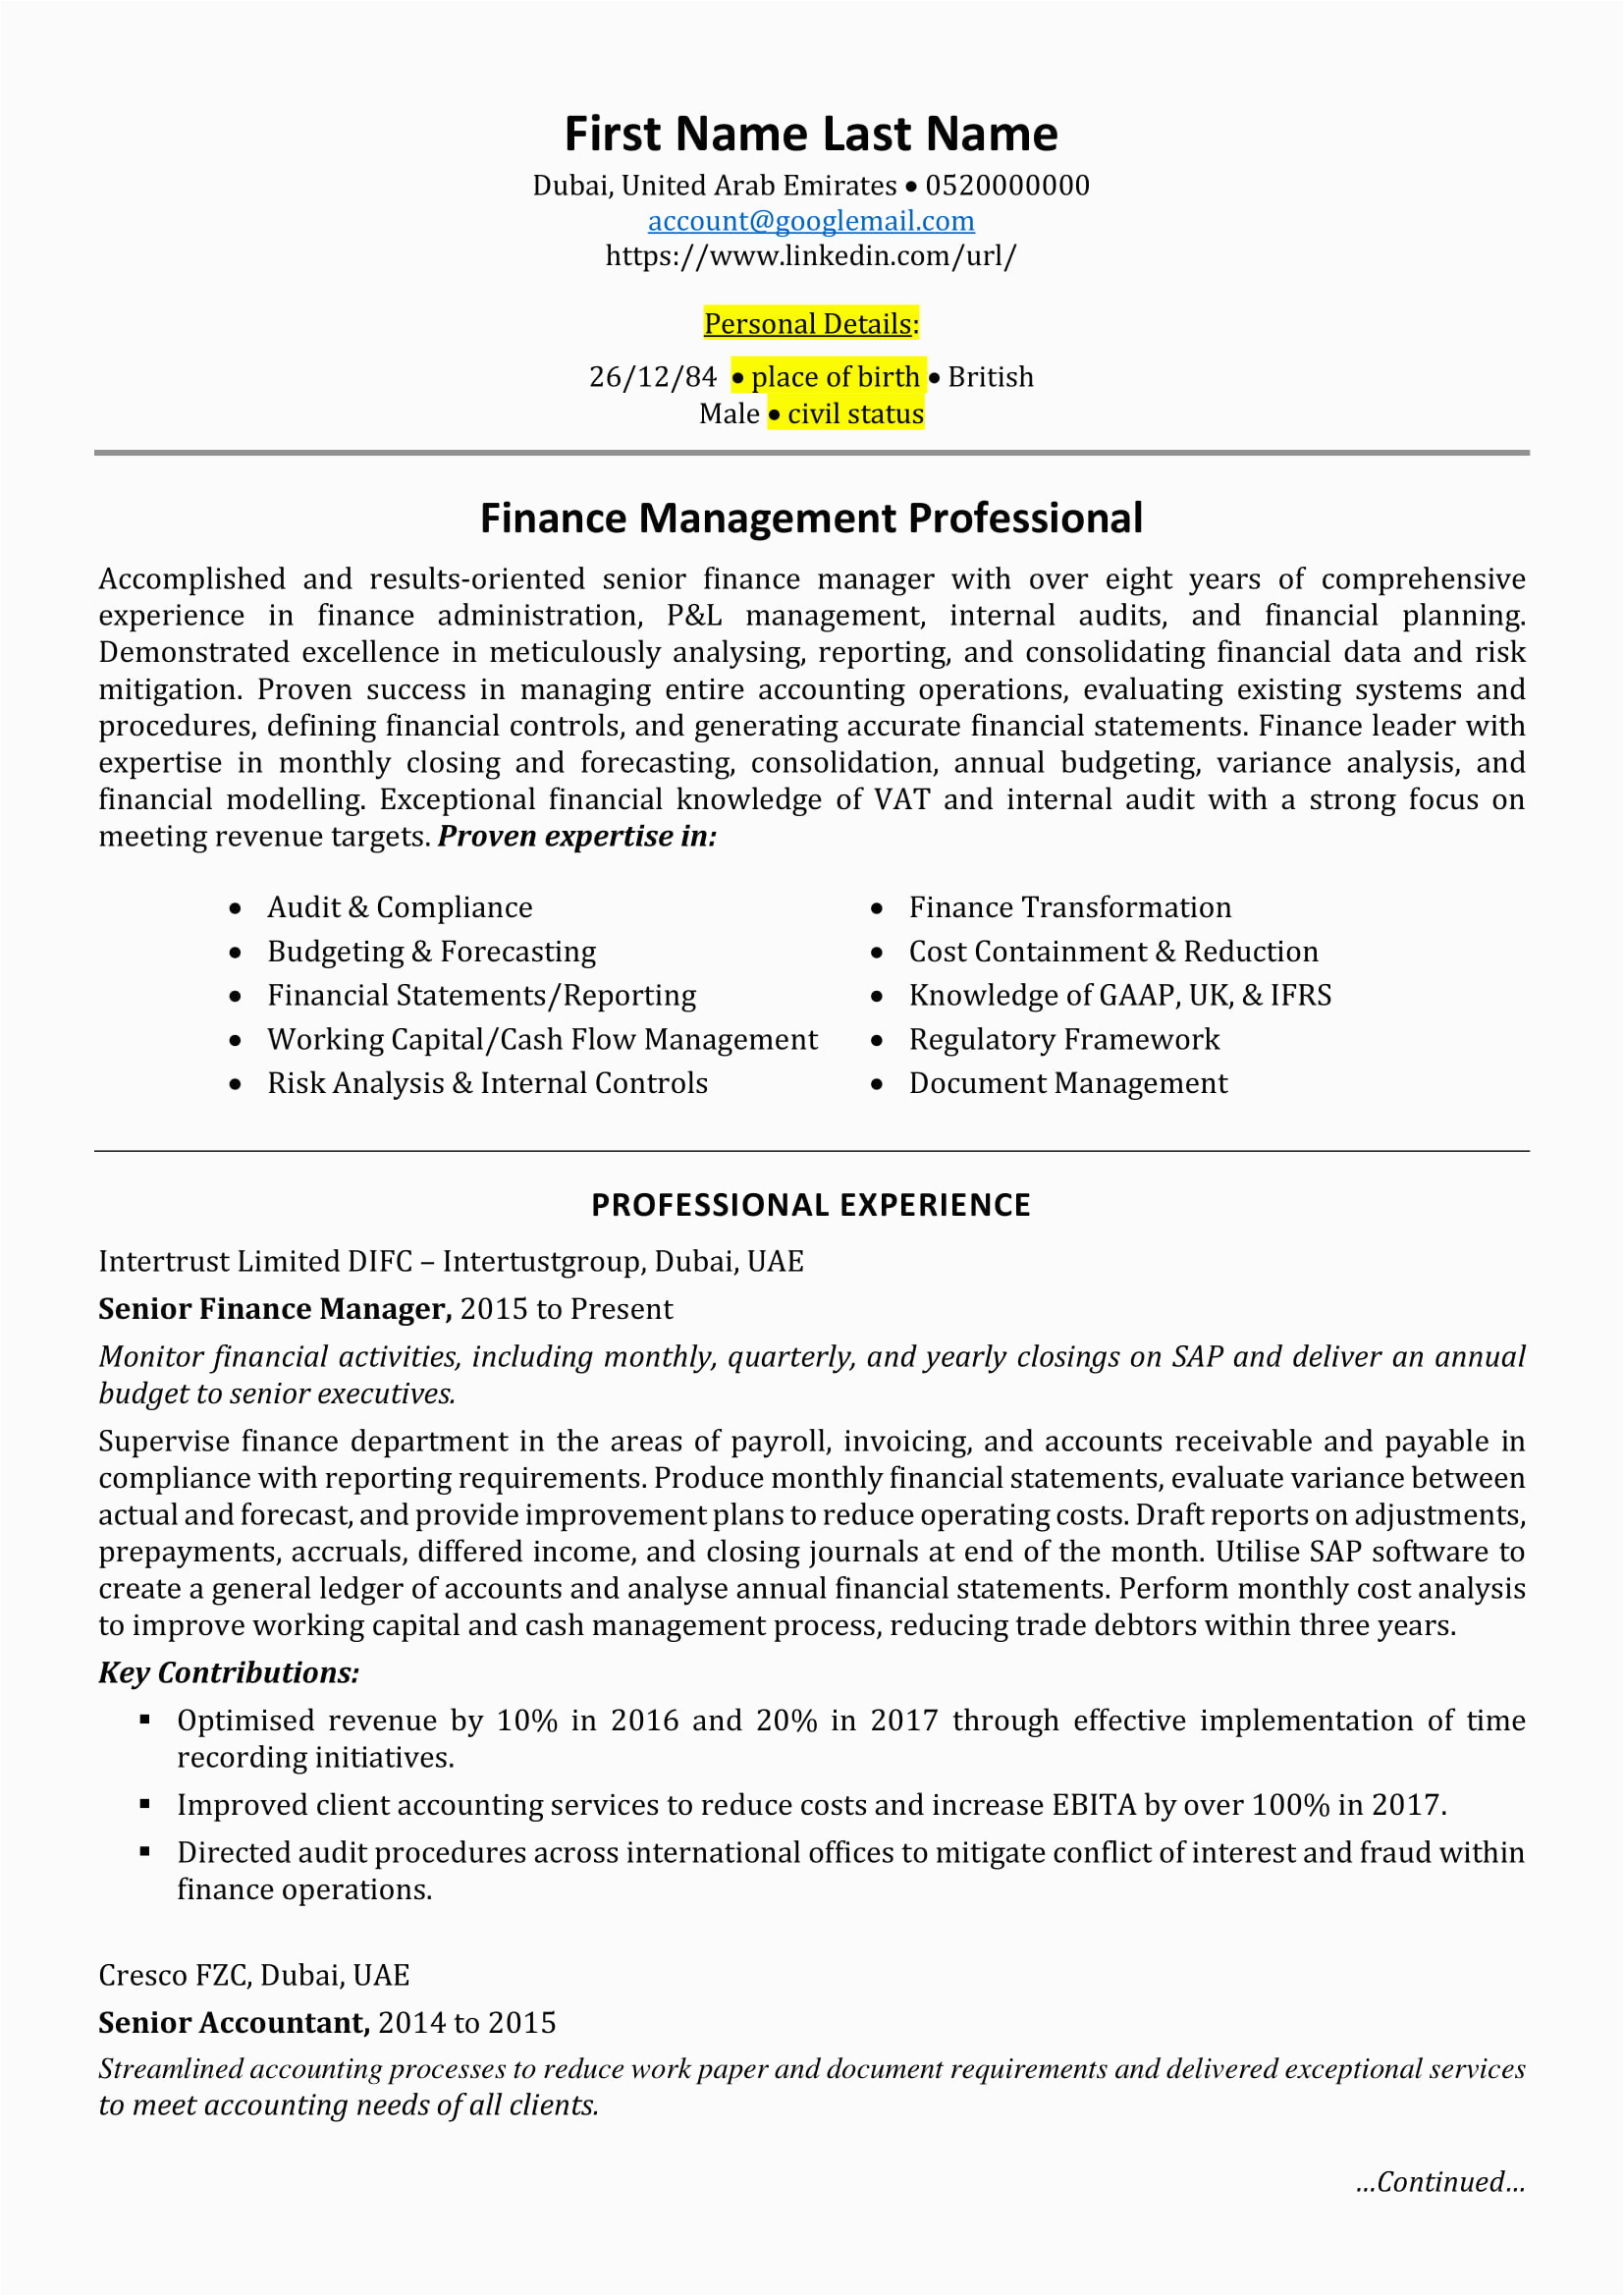 Resume Samples for Experienced Finance Professionals Finance Resumecroc